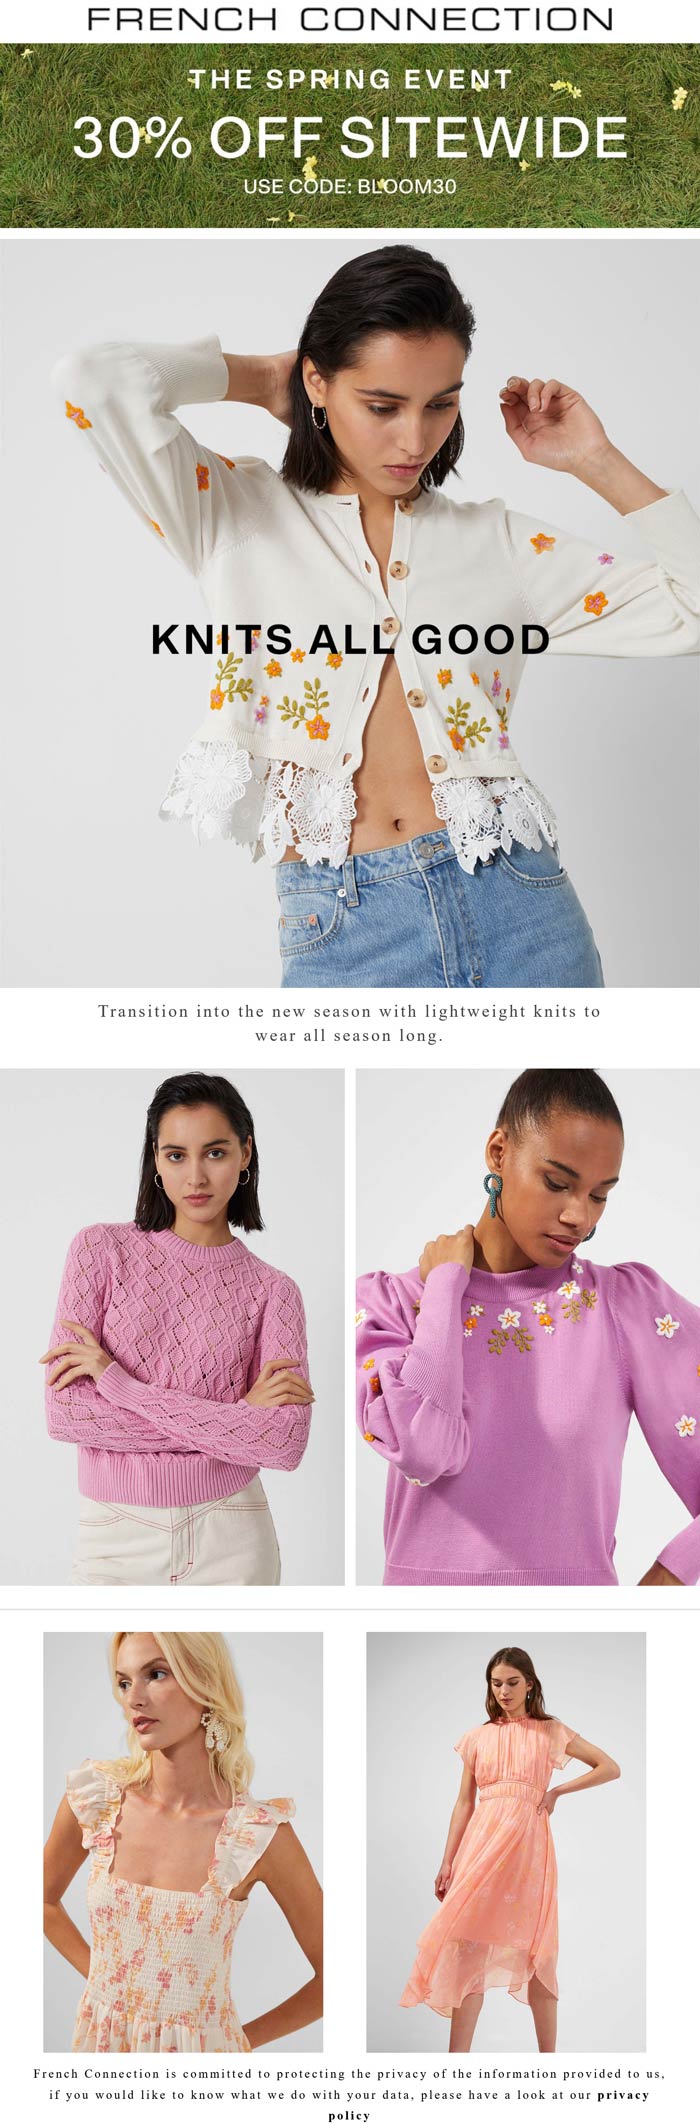 French Connection stores Coupon  30% off everything online at French Connection via promo code BLOOM30 #frenchconnection 